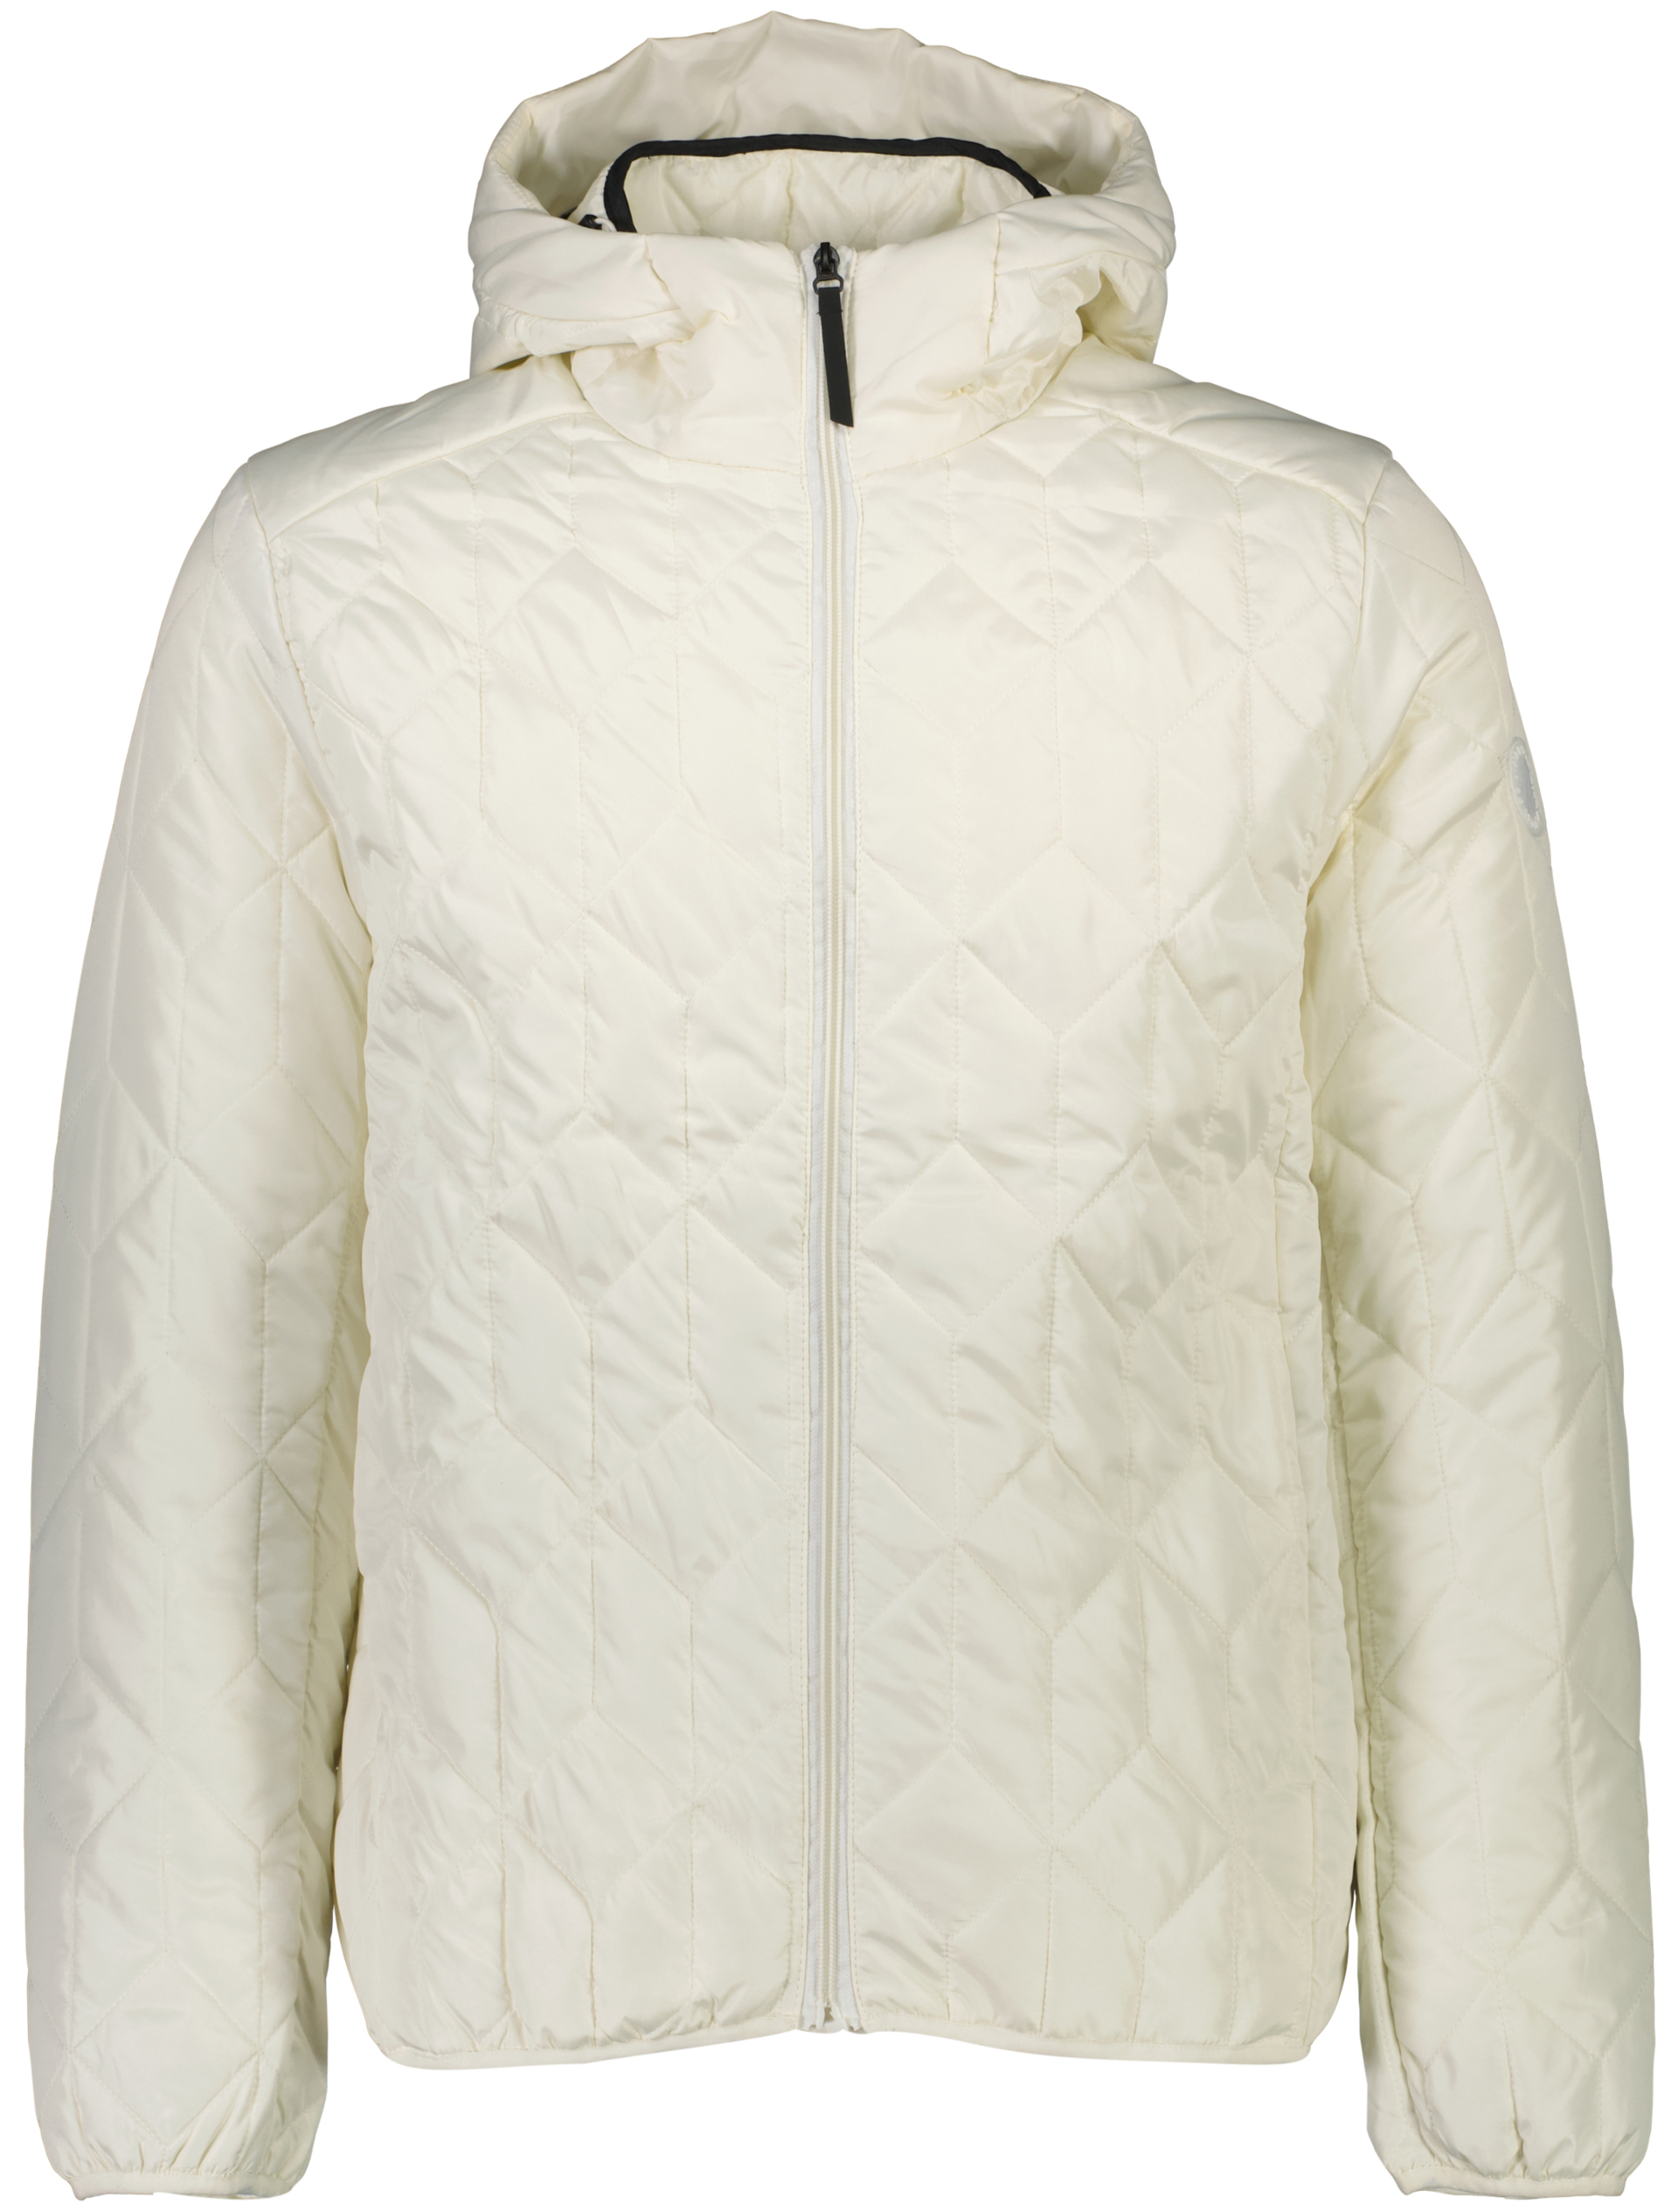 Lindbergh Casuel jackets white / off white